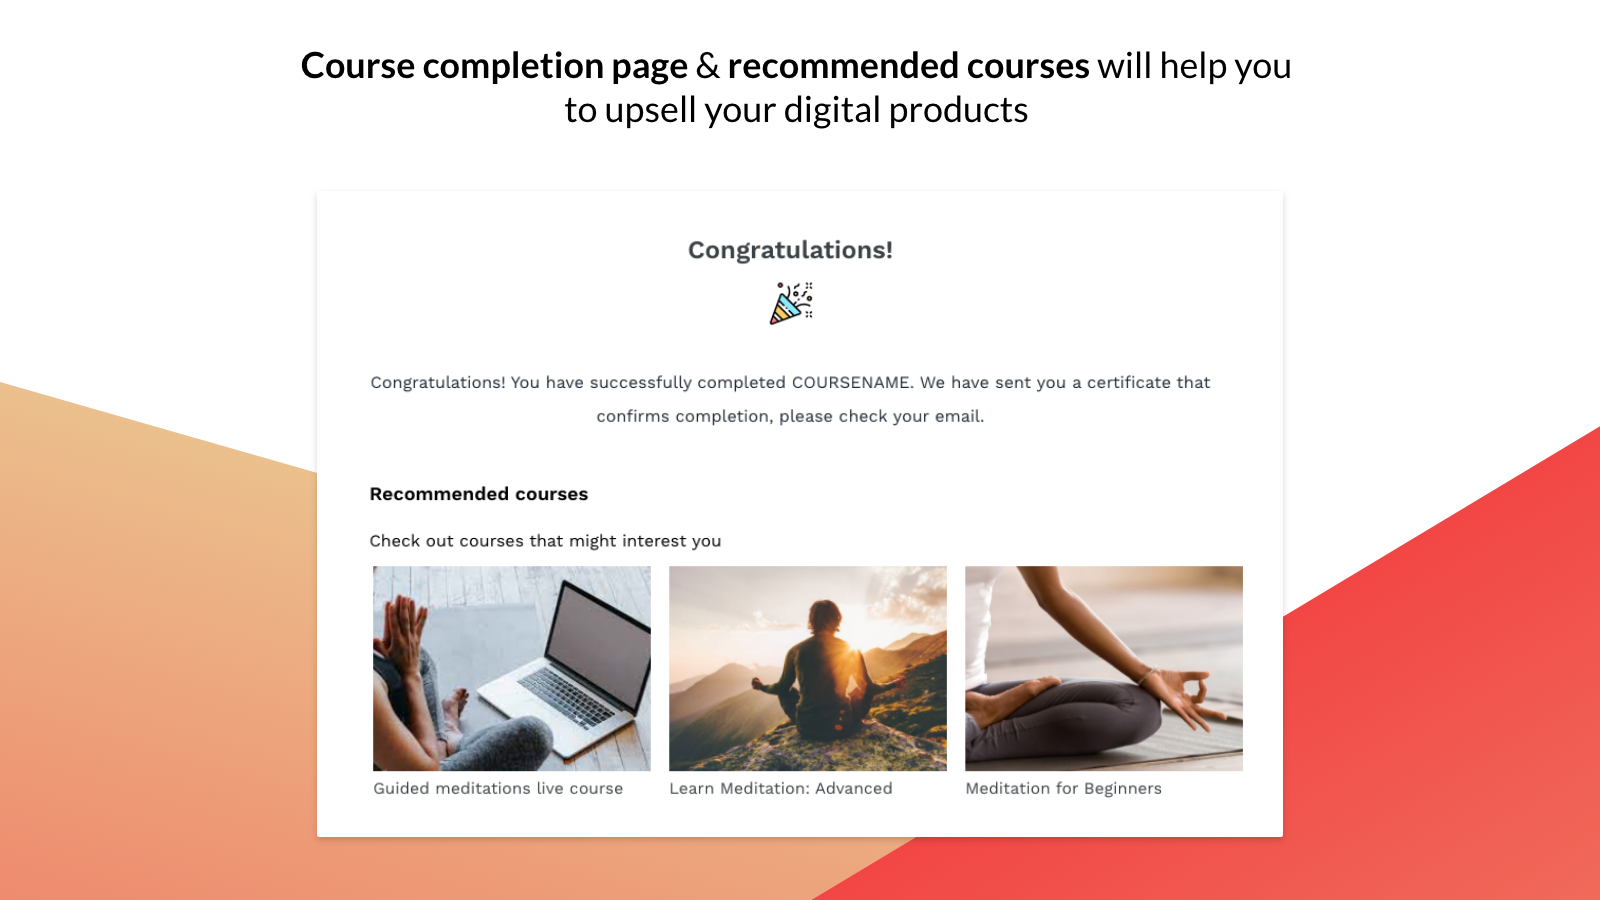 Courses - upsell by using course recommendations on completion